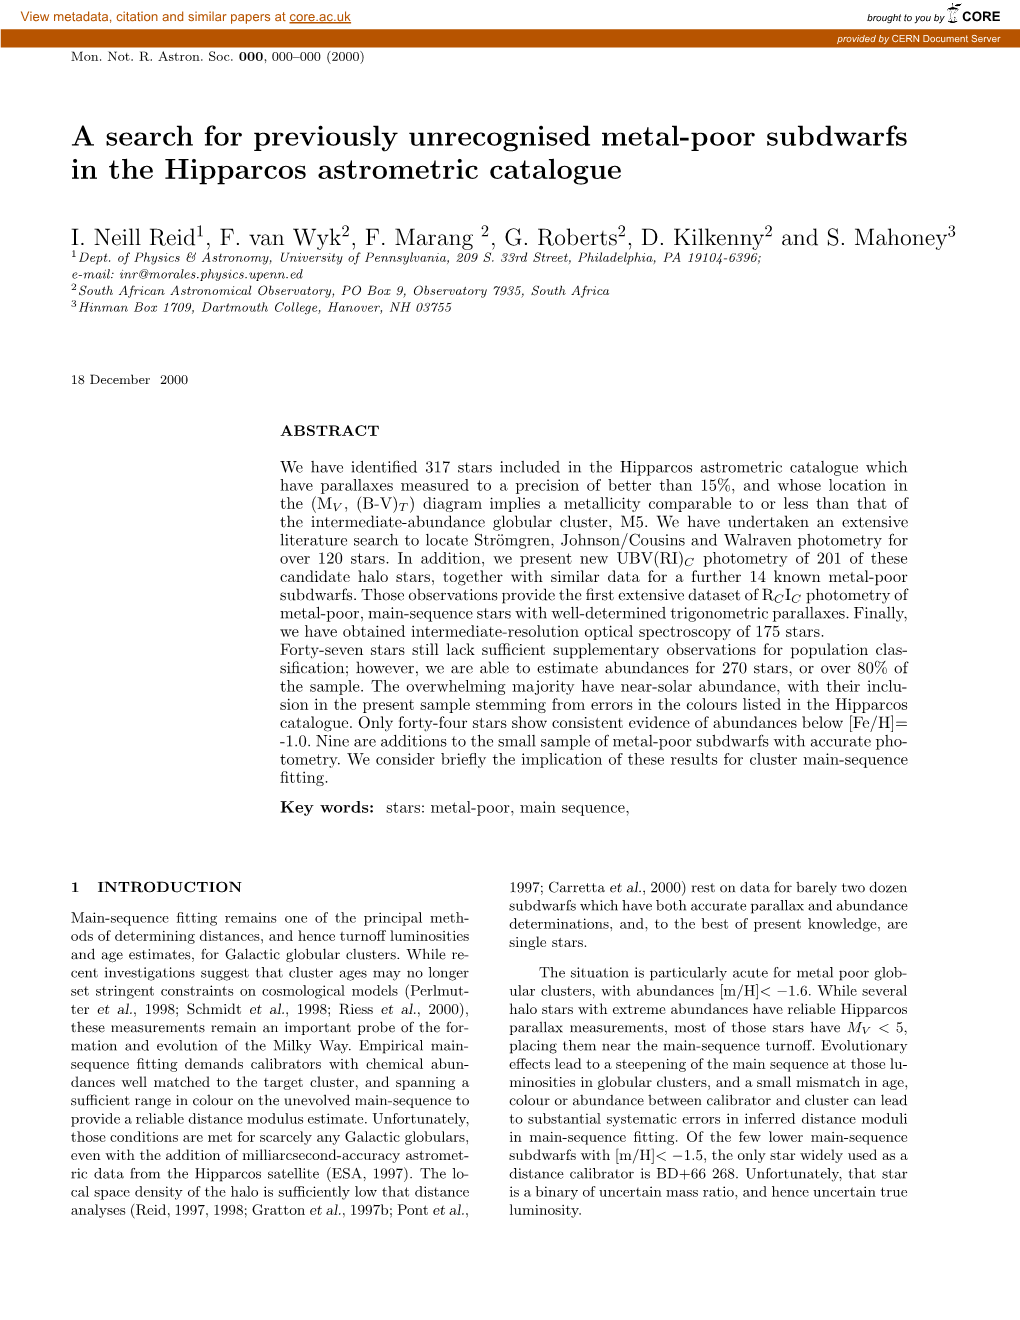 A Search for Previously Unrecognised Metal-Poor Subdwarfs in the Hipparcos Astrometric Catalogue